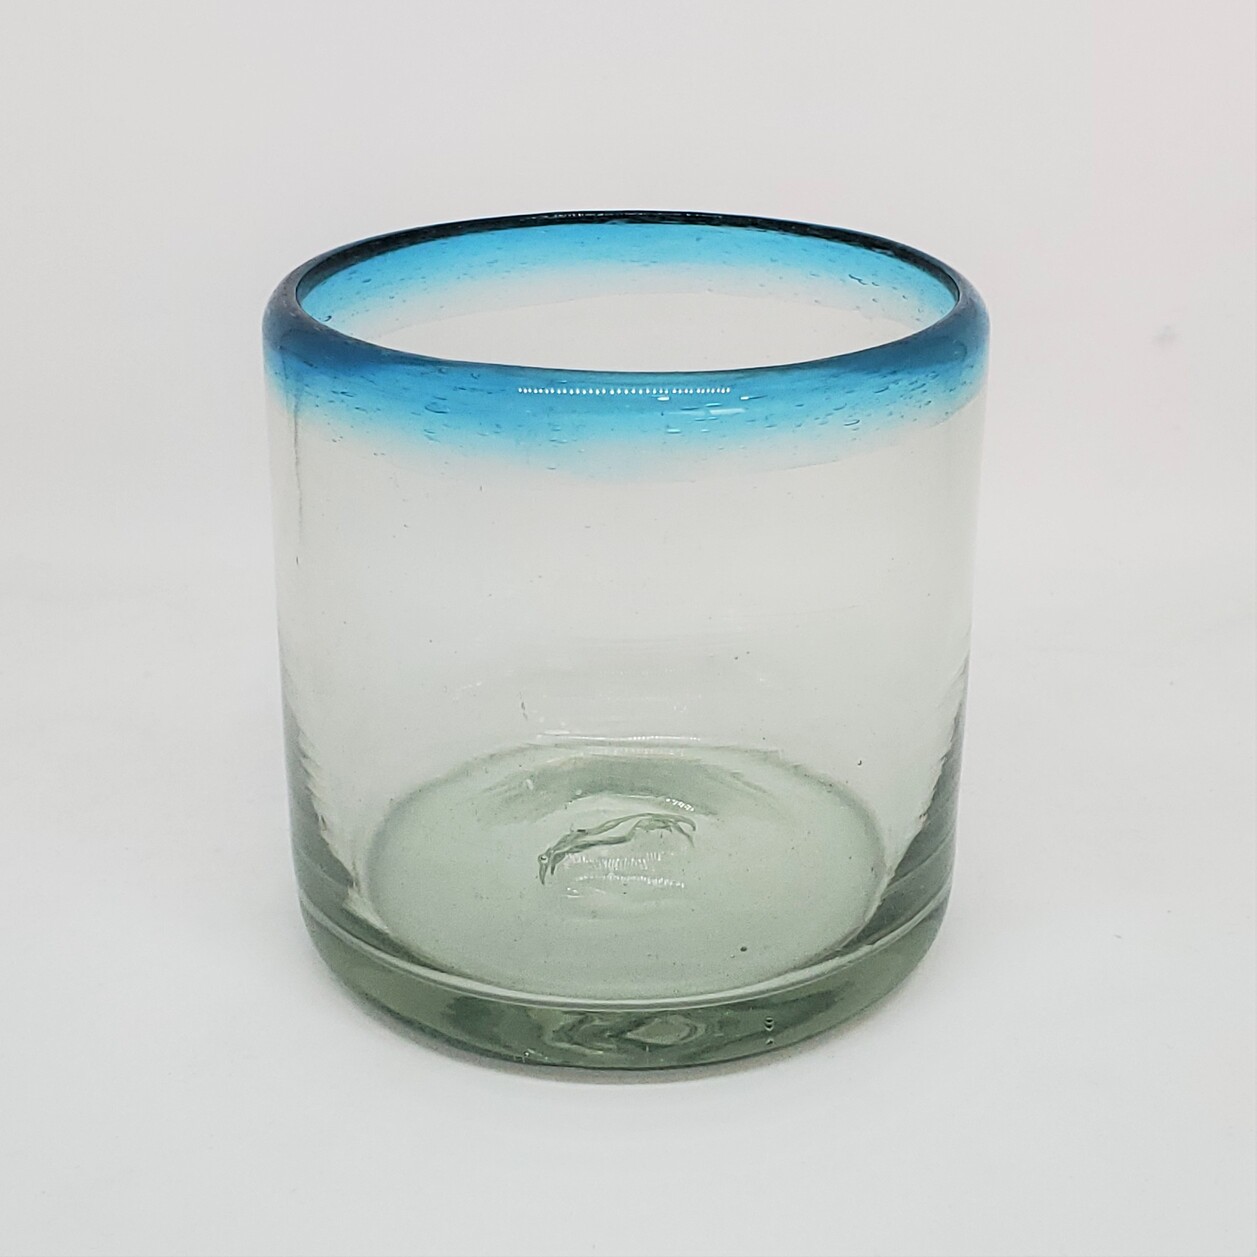 Colored Rim Glassware / Aqua Blue Rim 8 oz DOF Rock Glasses (set of 6) / These glasses are just the right size to enjoy fresh squeezed fruit juice in the moning.